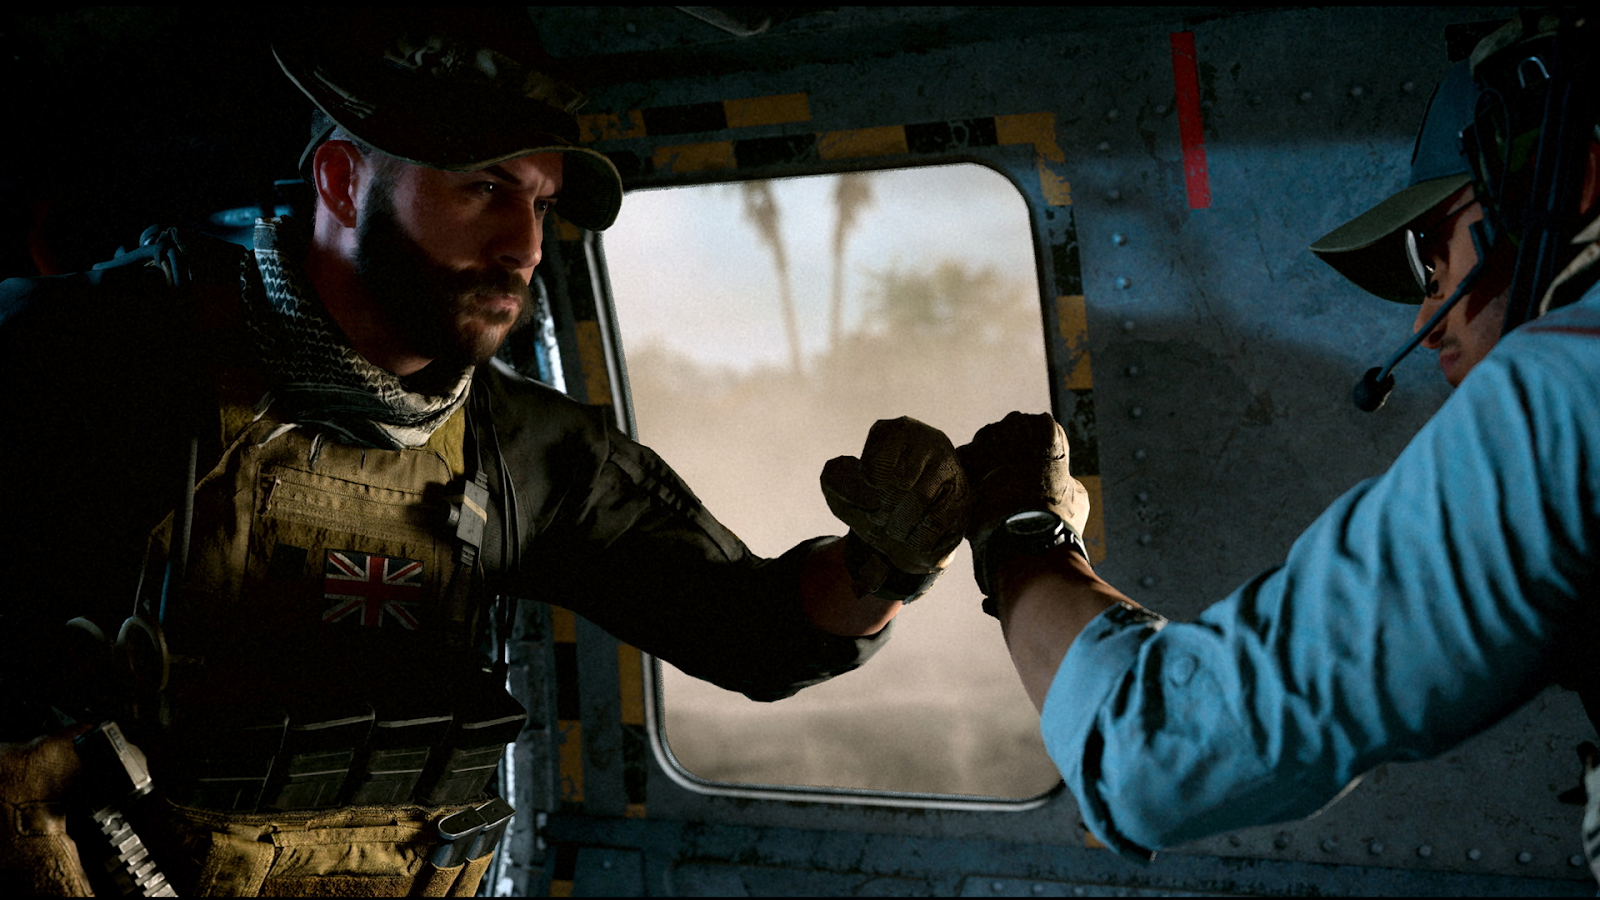 Call of Duty®: Vanguard PC Trailer, Specs, and Preloading